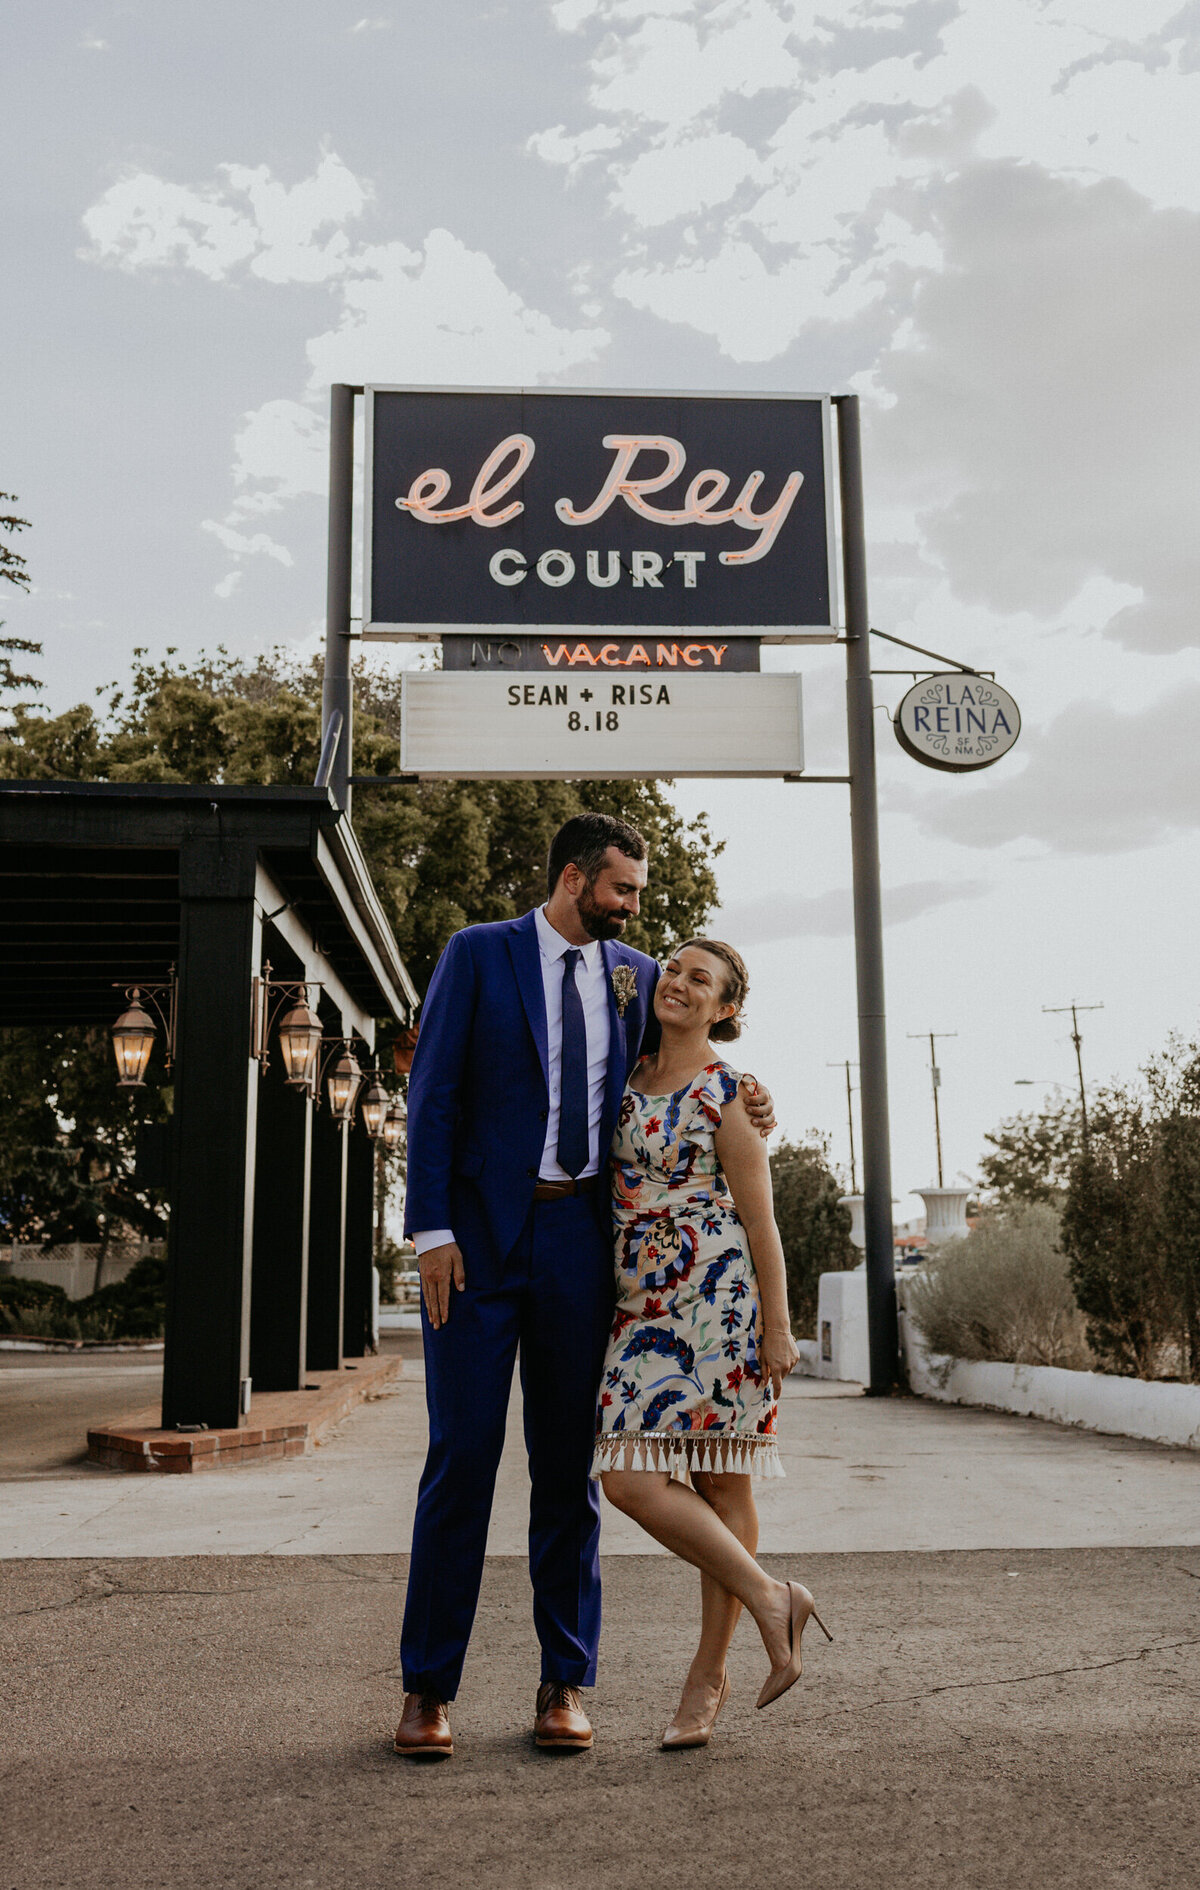 bride and groom stand in front of El Rey Court sign in Santa Fe featuring their names and wedding date